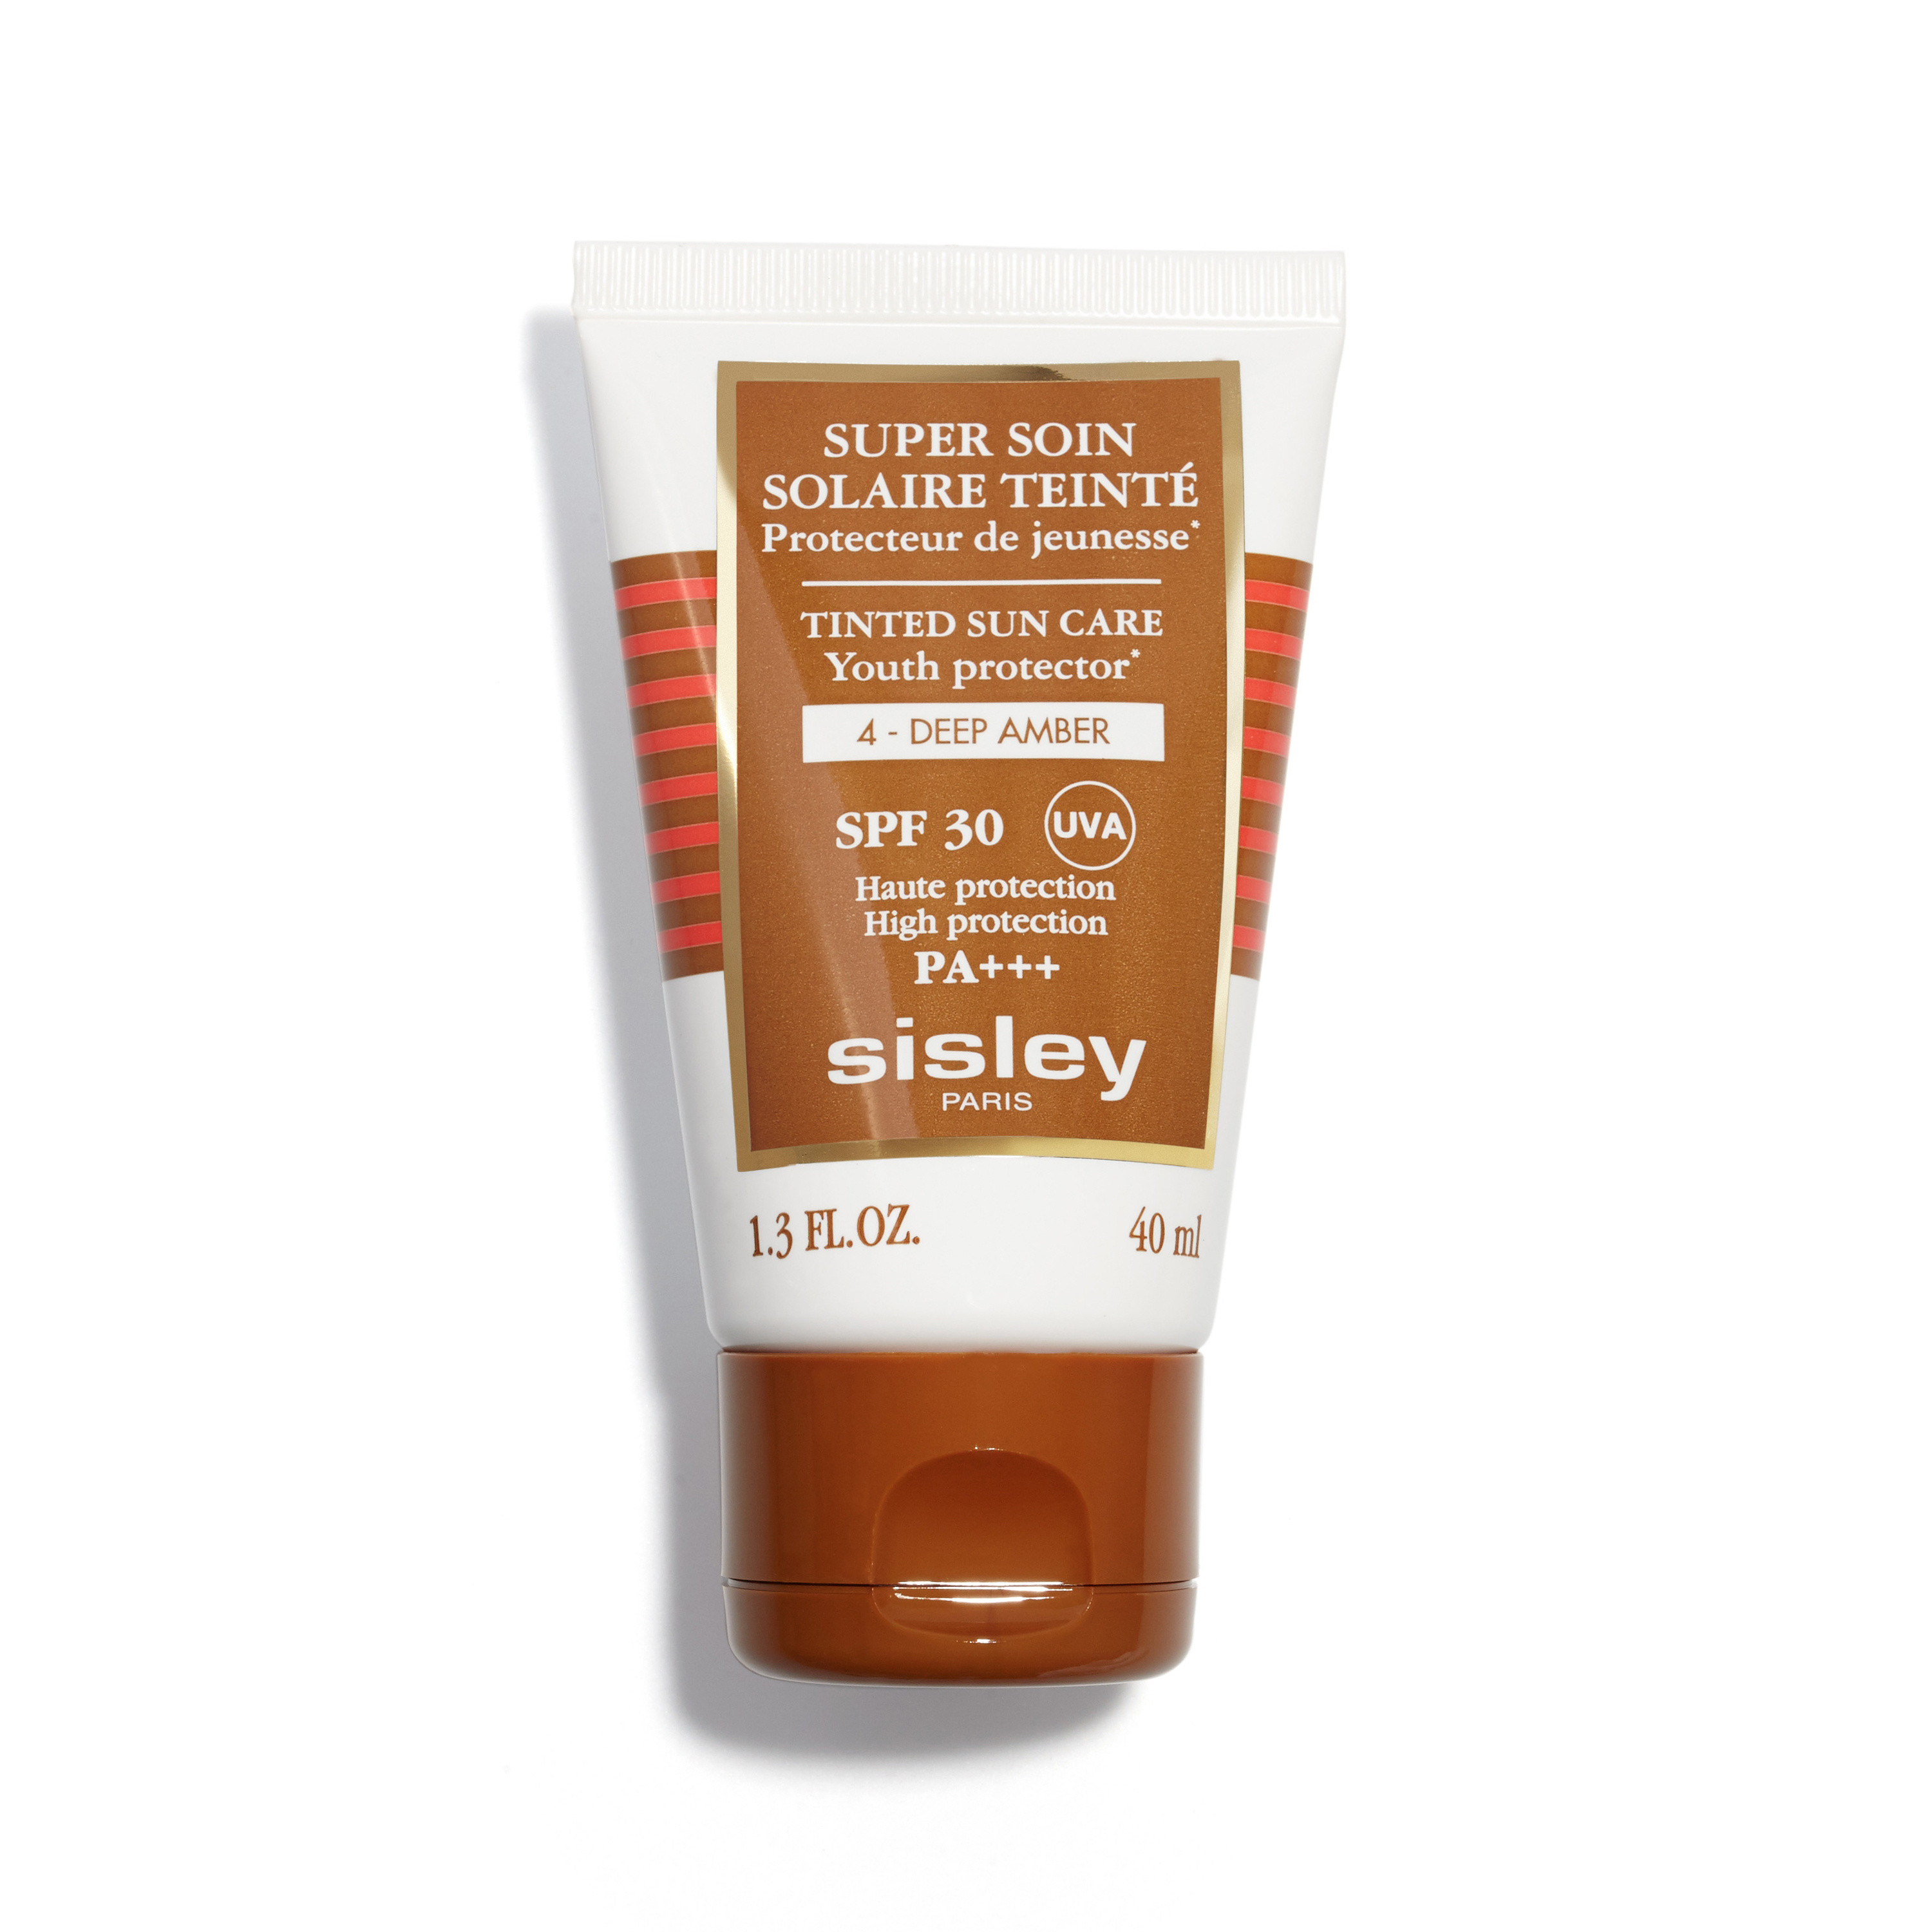 Super Soin Solaire Teinté SPF 30 N°4 Deep Amber, N°4 Deep Amber - Oro, large image number 0